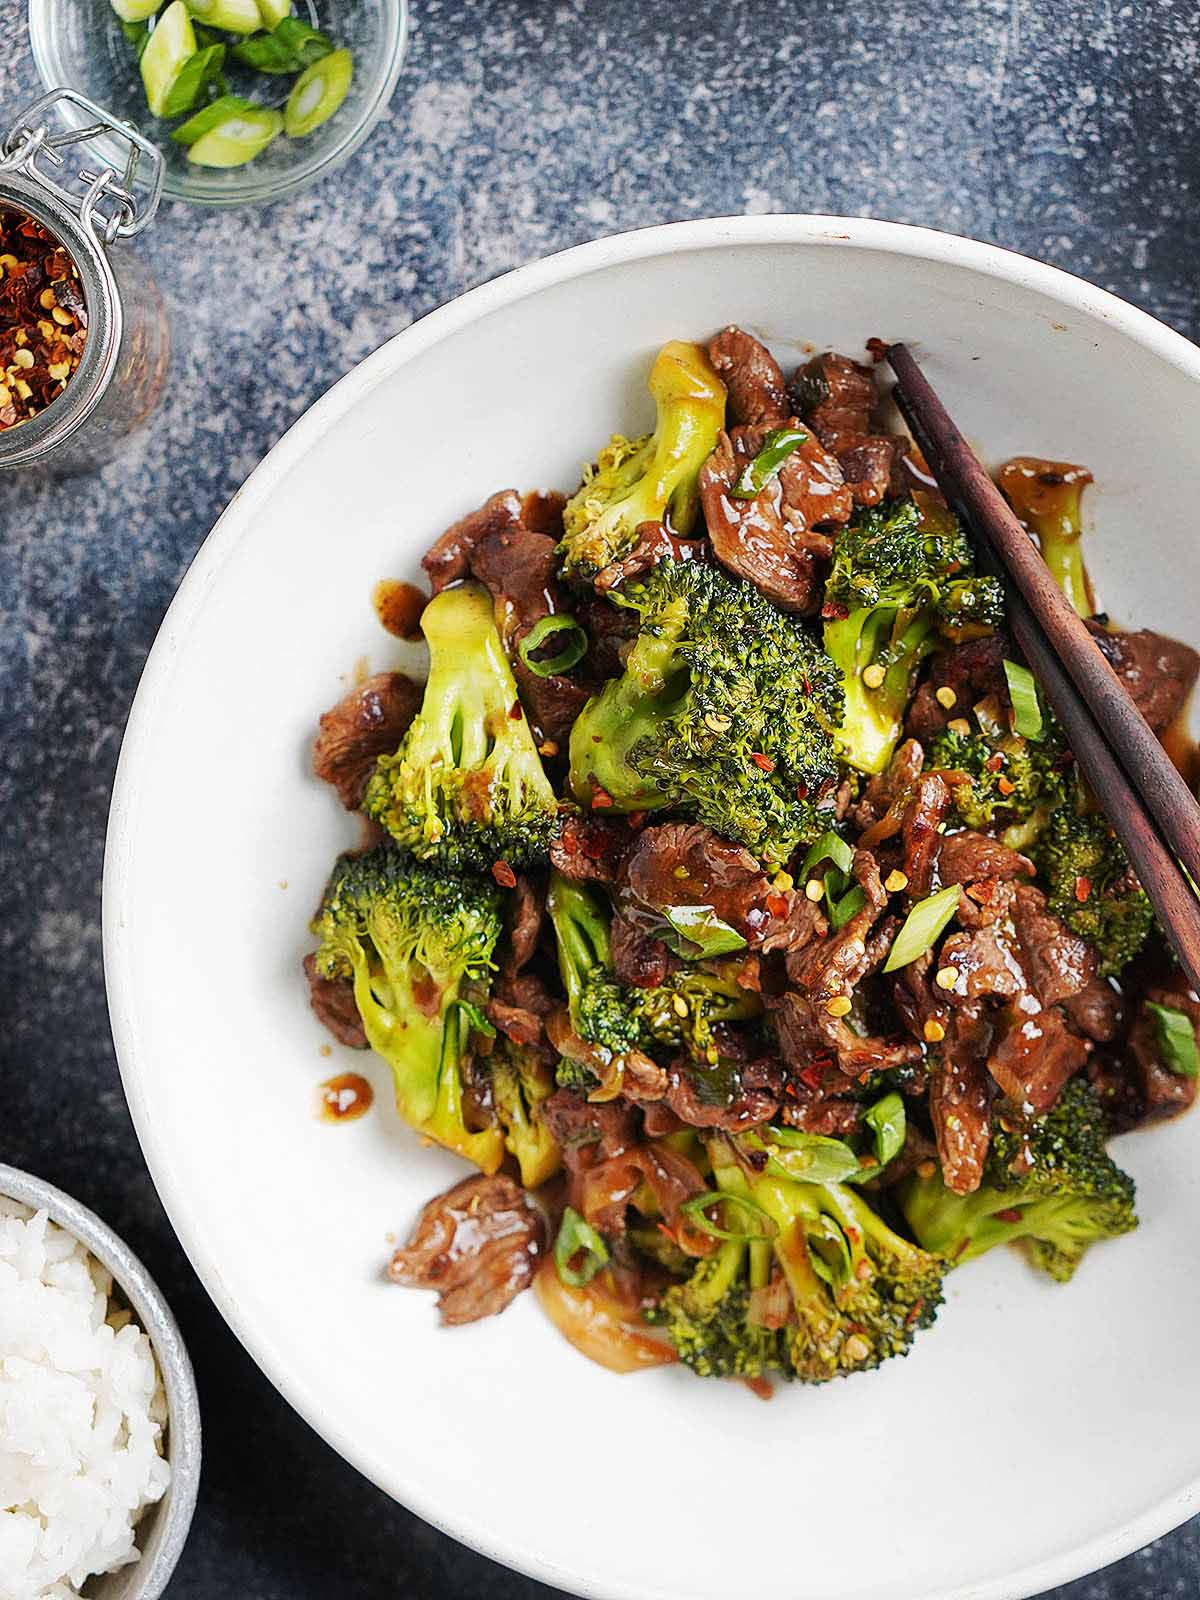 Cooked beef & broccoli stir fry in a bowl on a dark table background.